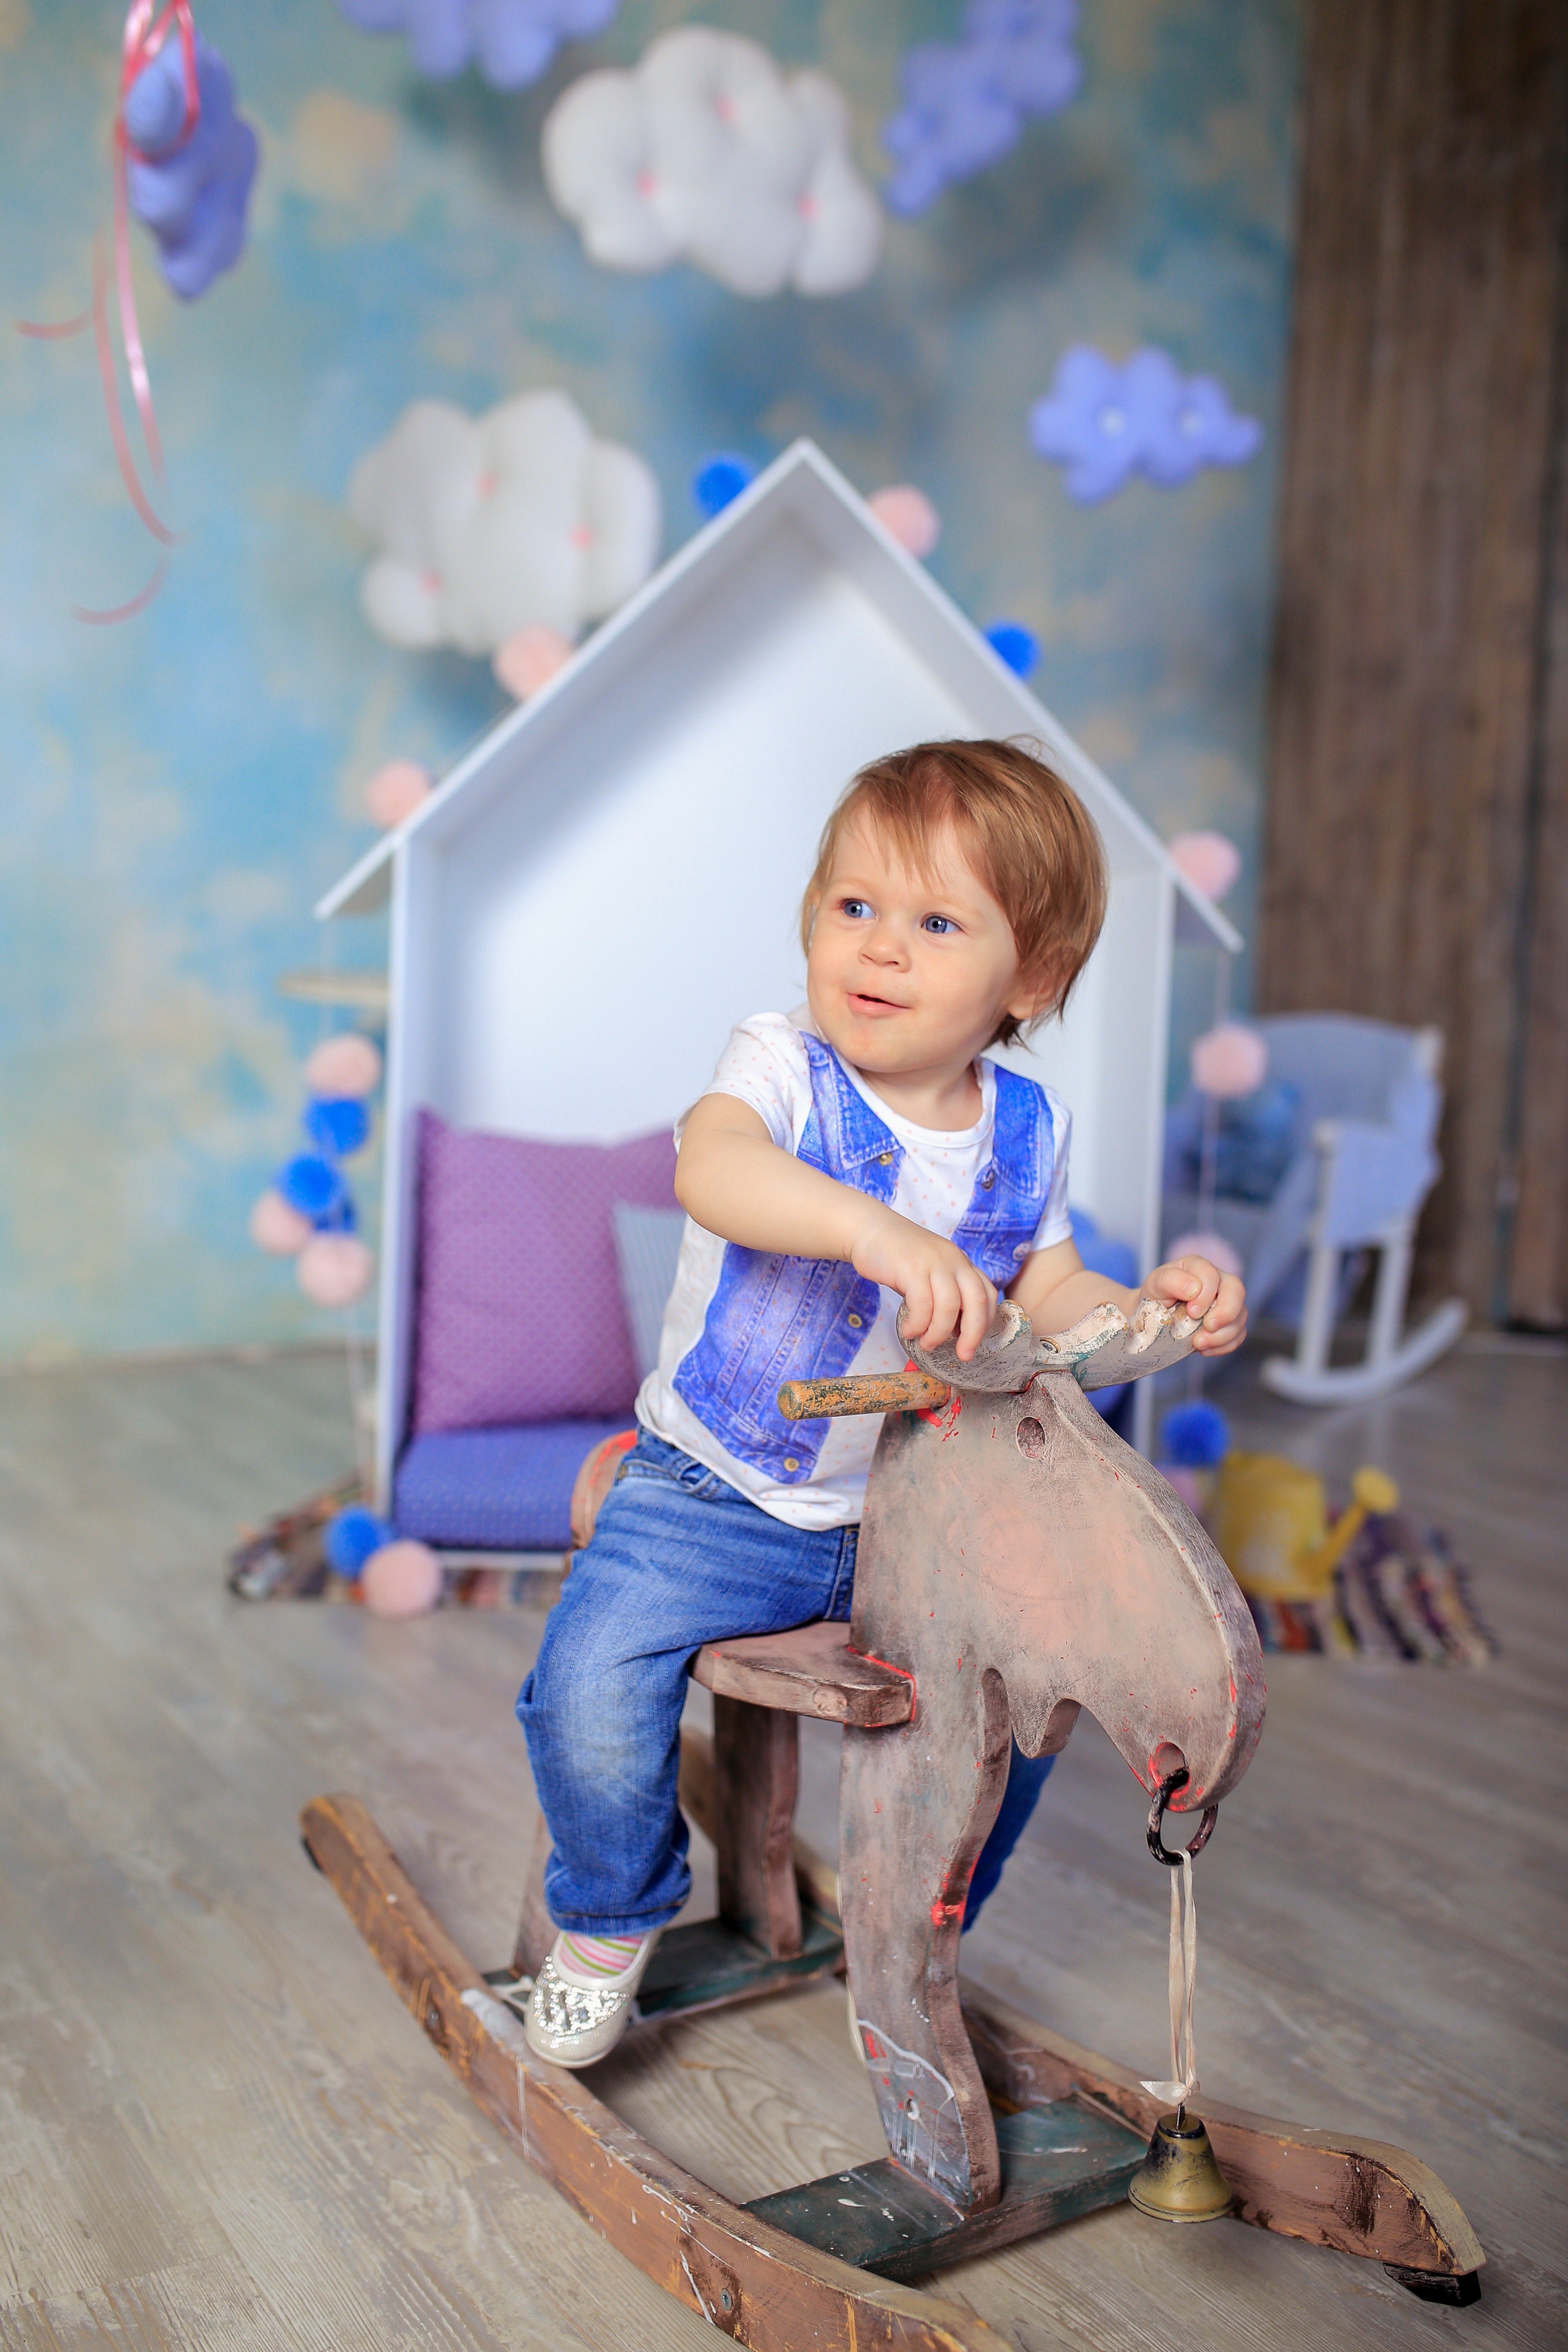 Boy in Blue and White Crew Neck T Shirt Riding on Wooden Rocking Moose, Baby, Child, Childhood, Cute, HQ Photo